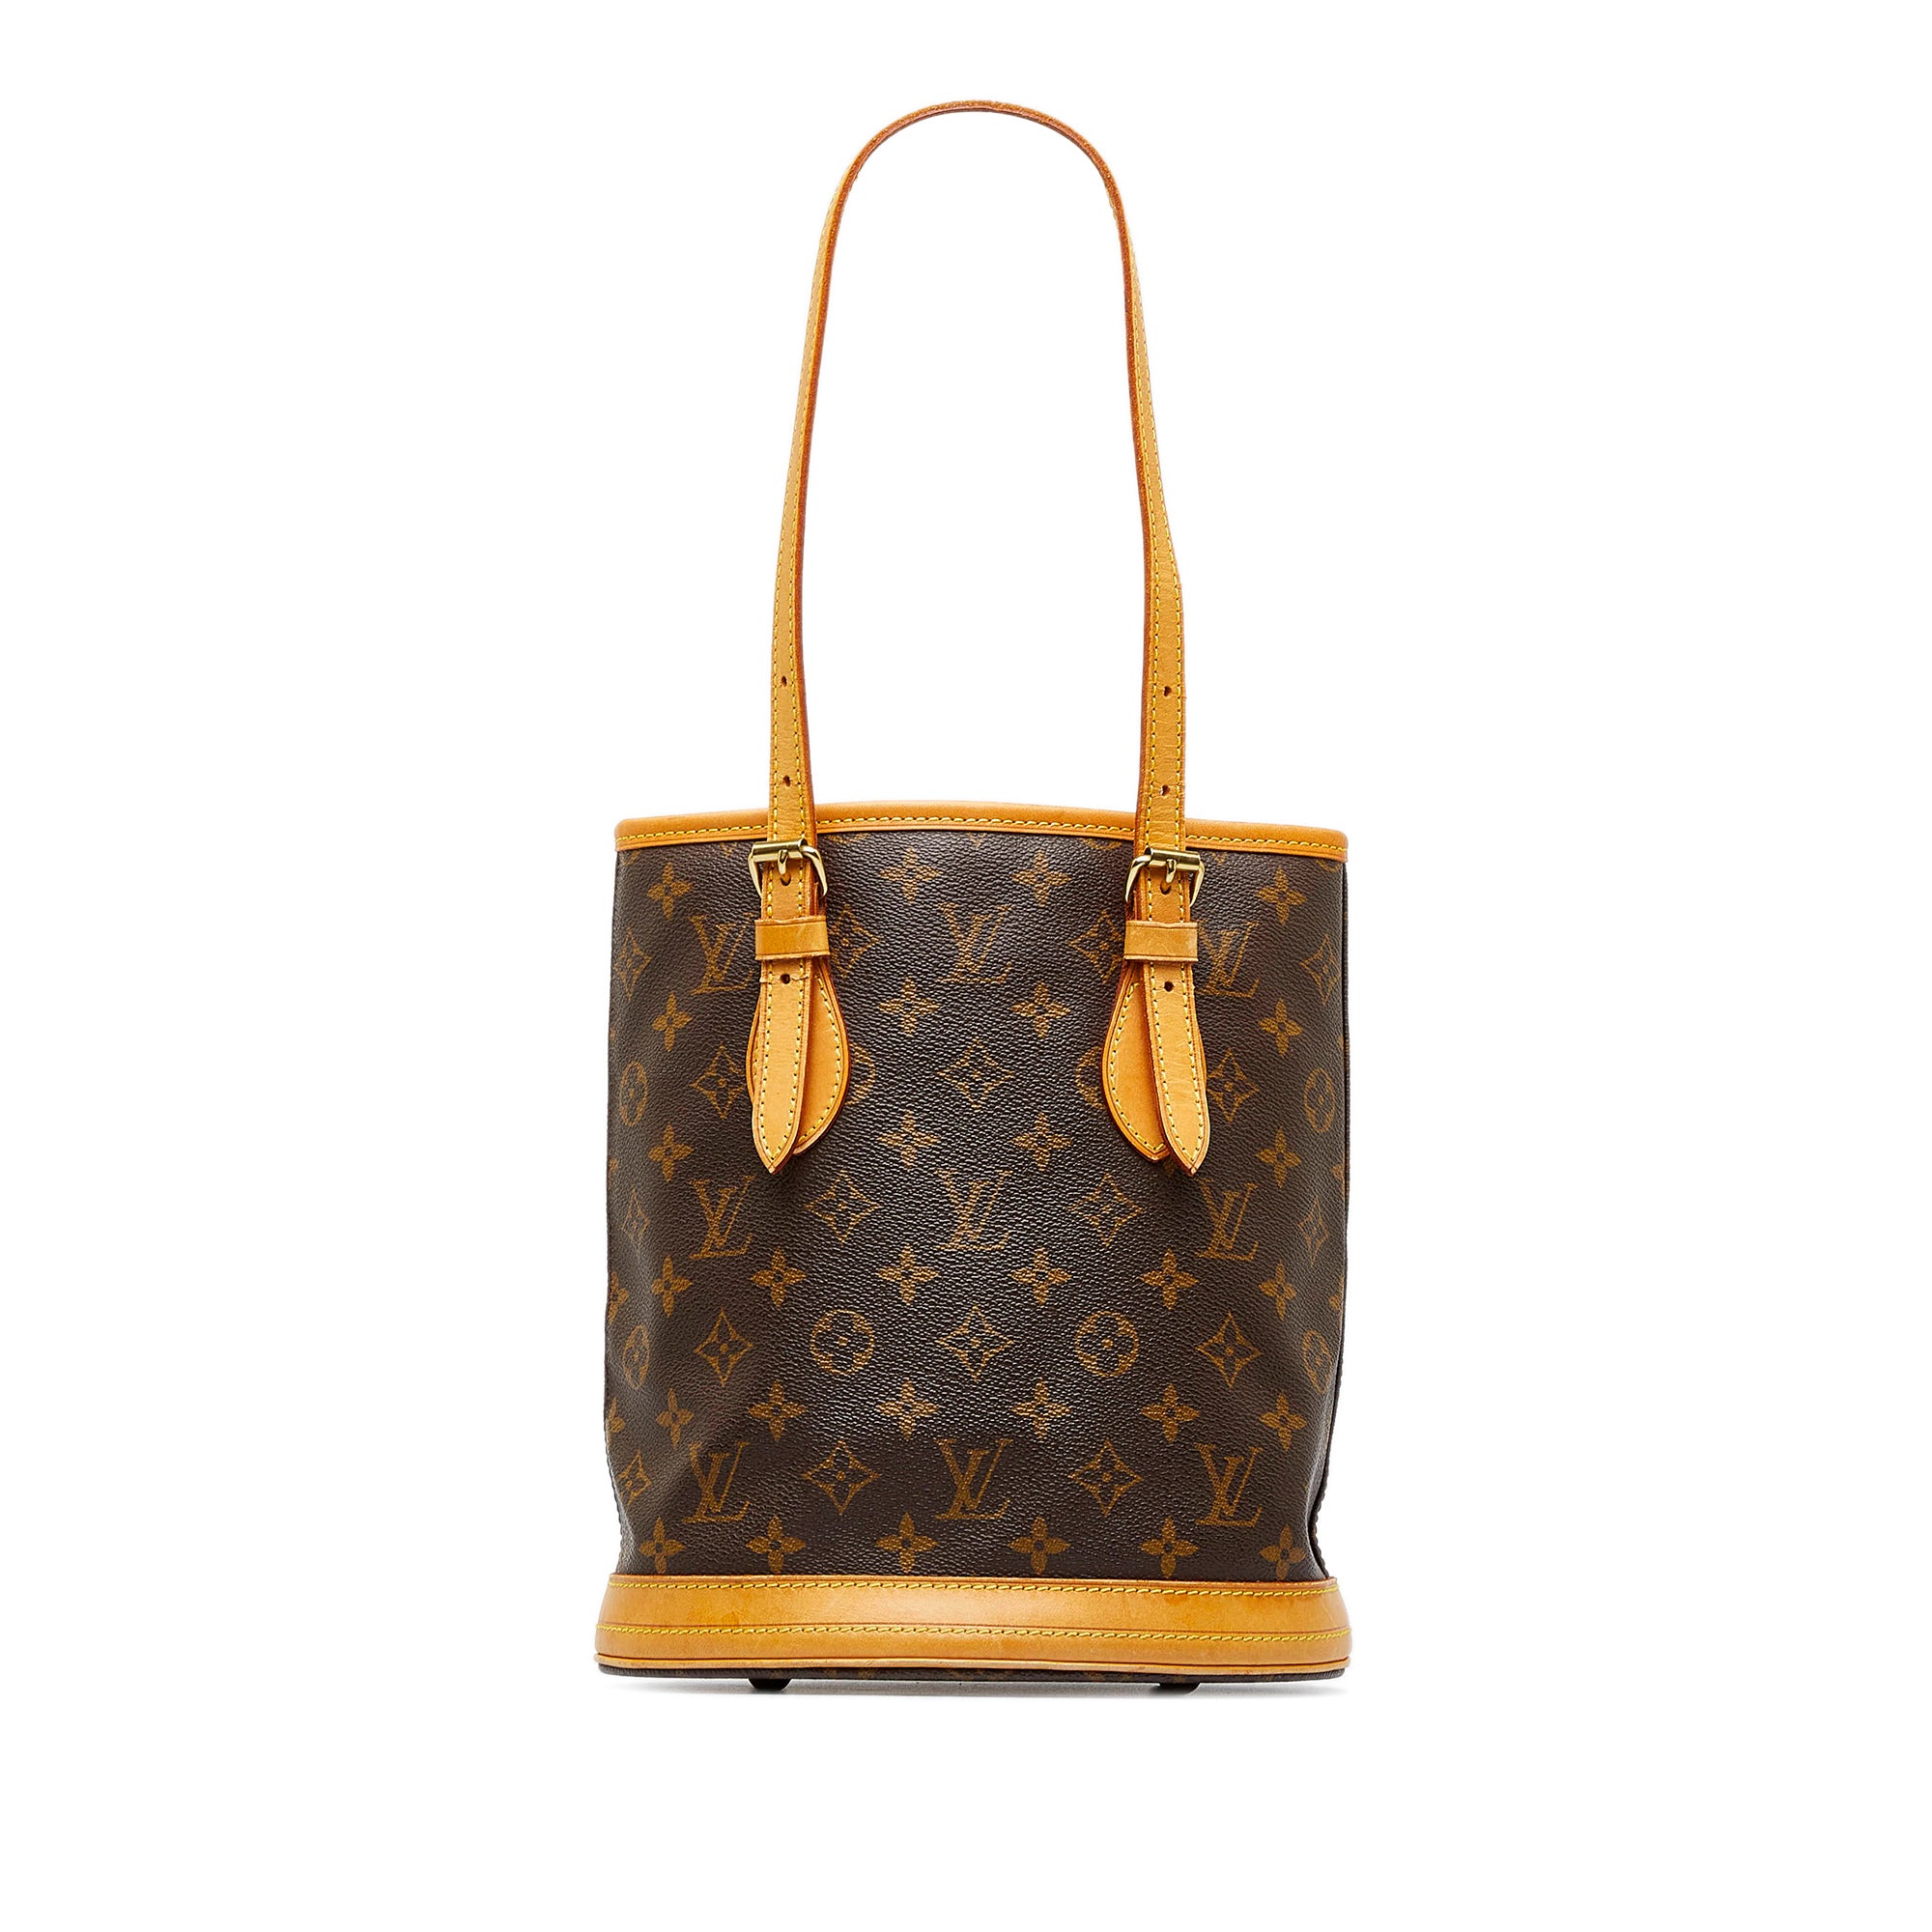 A Guide to Authenticating the Louis Vuitton Mongoram Bucket Purse